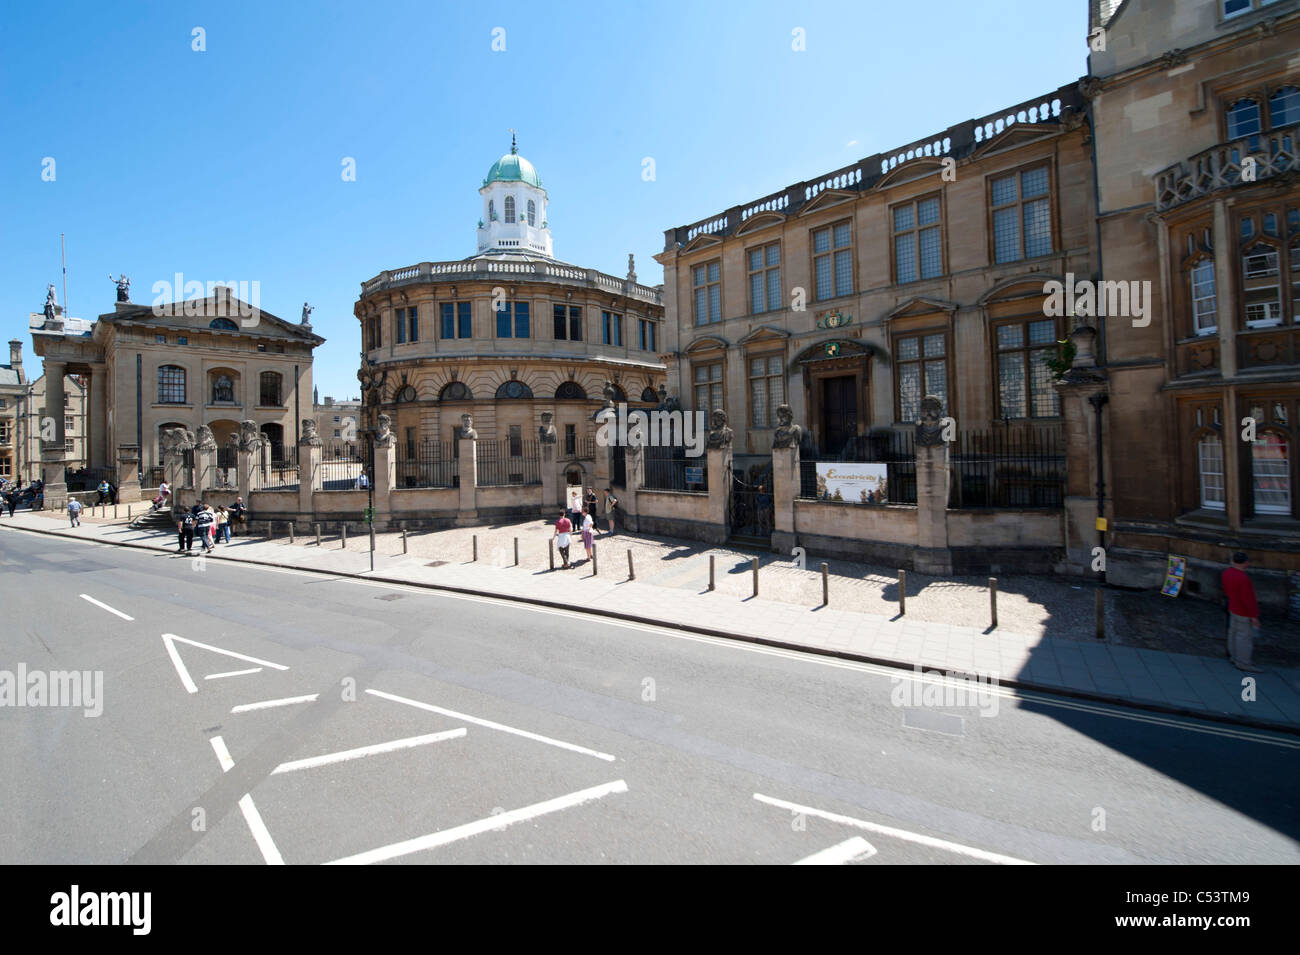 The Sheldonian and Clarendon building on Broad Street, Oxford Stock Photo